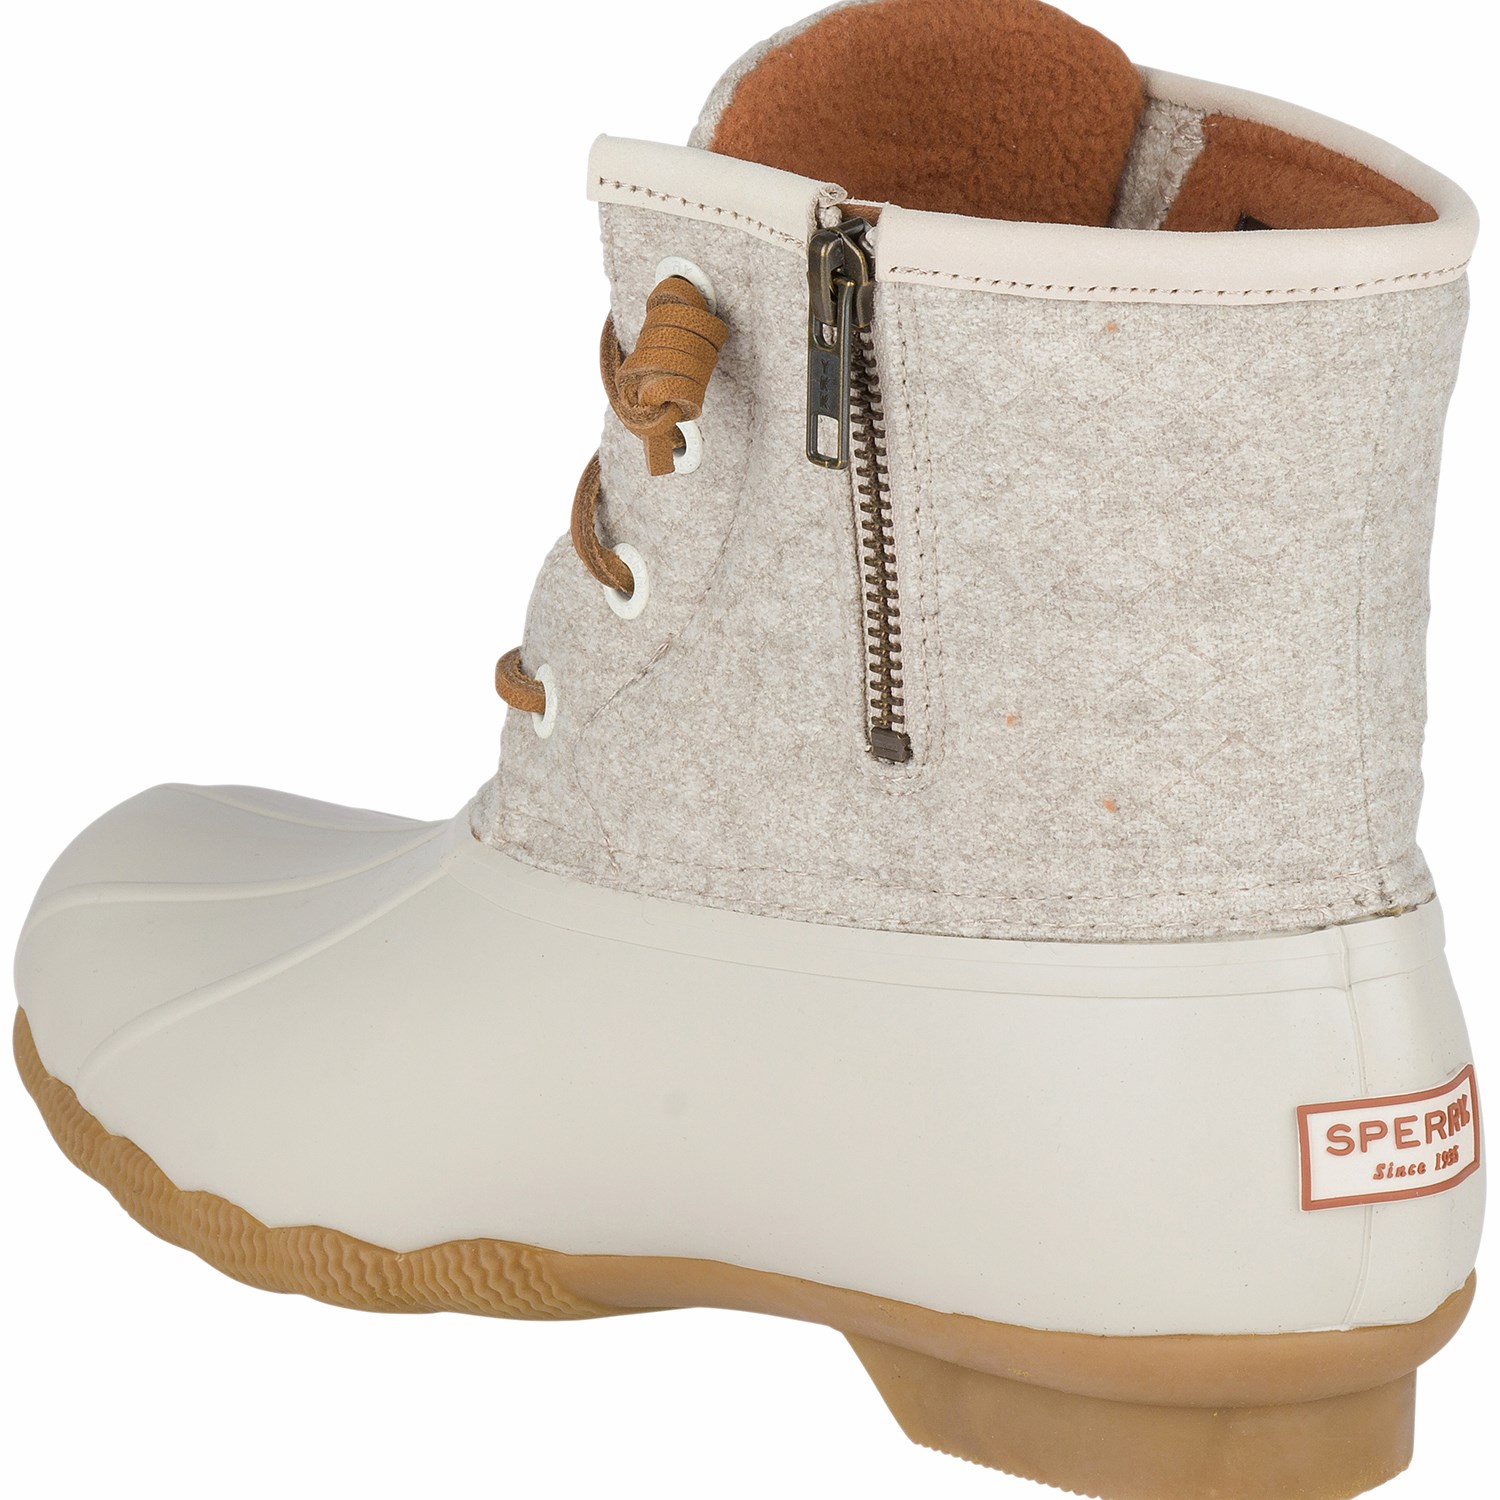 sperry saltwater wool embossed duck boots with thinsulate